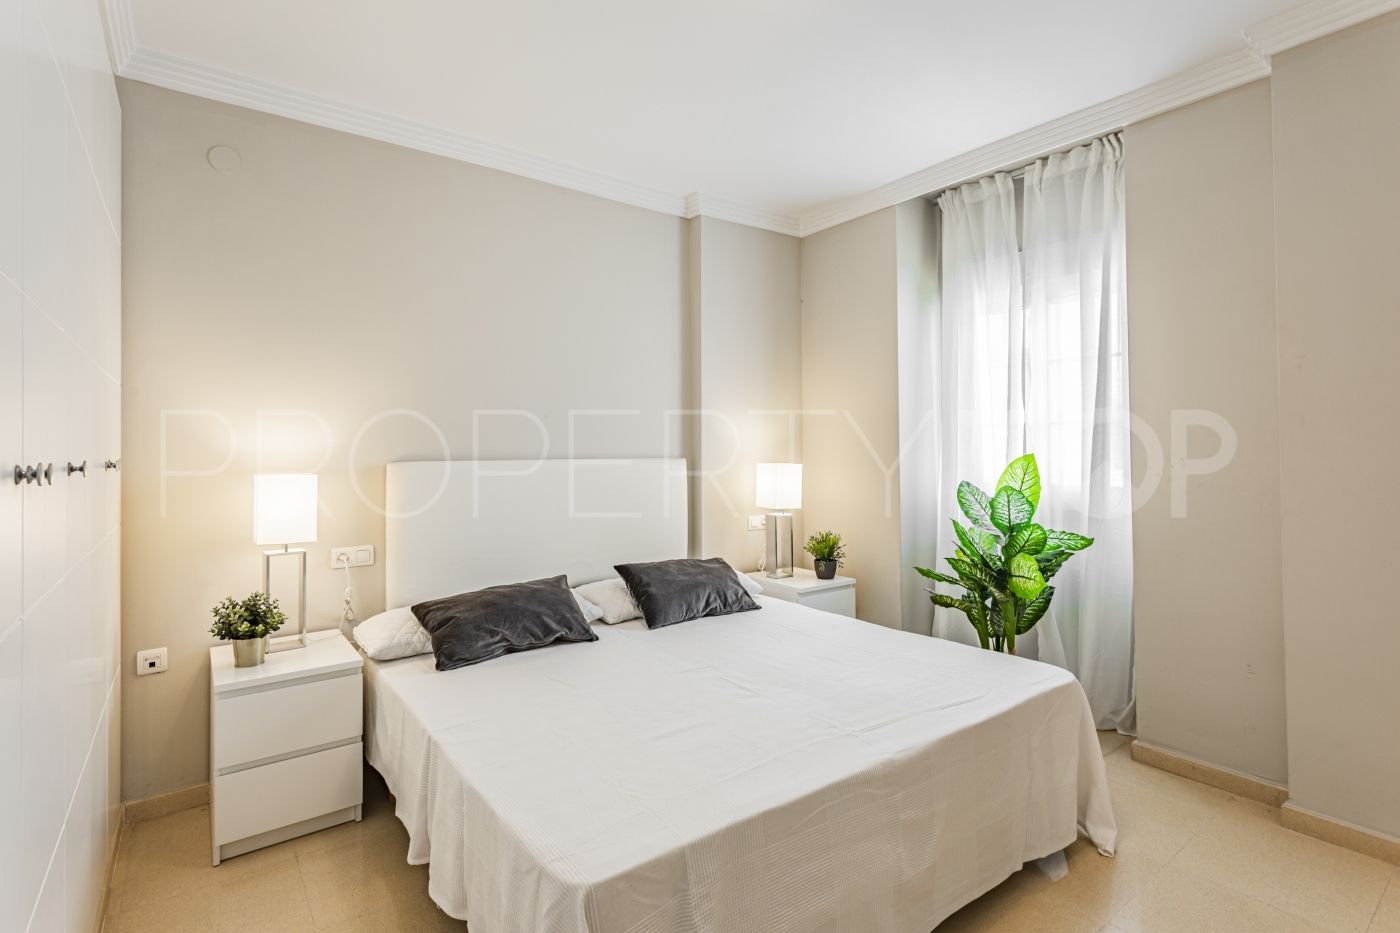 For sale apartment in Nueva Andalucia with 1 bedroom